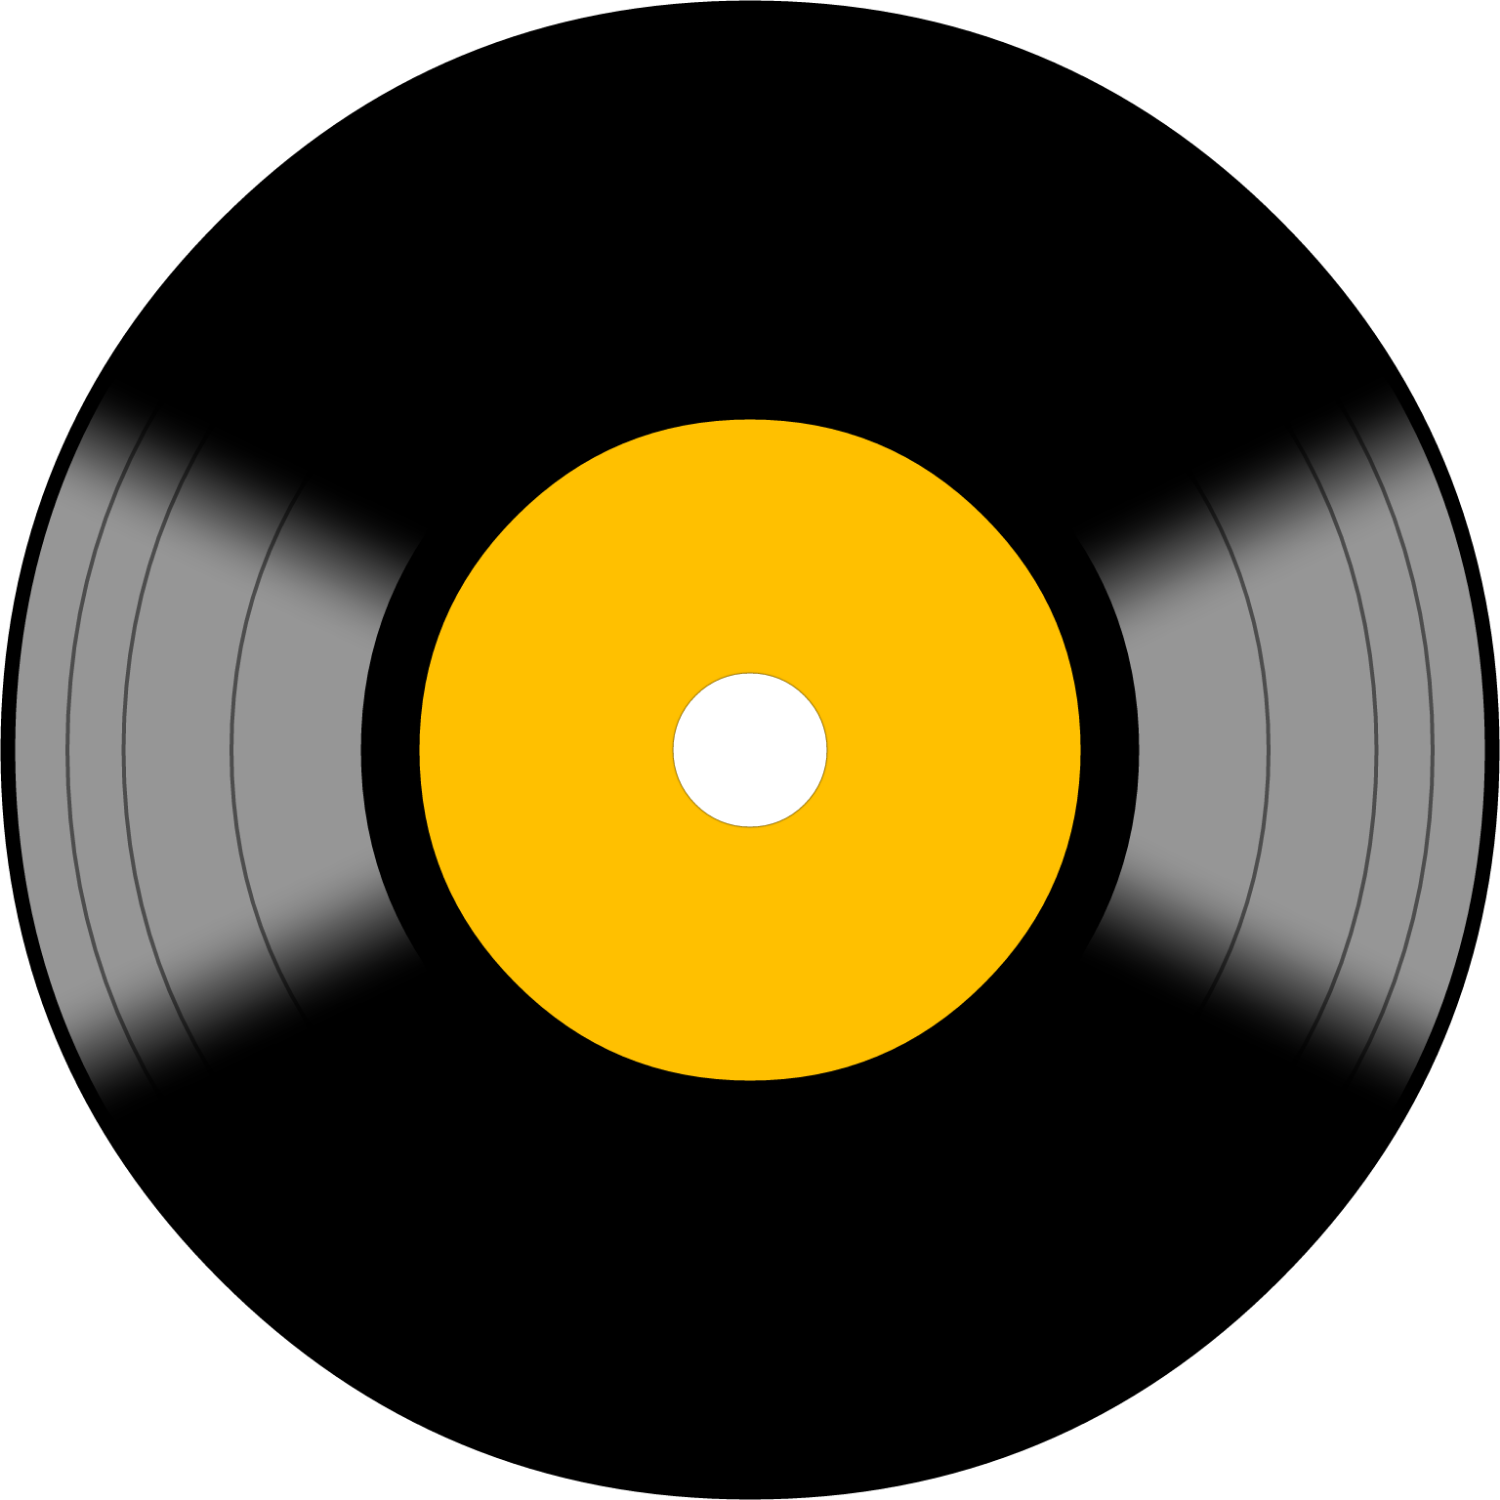 Vinyl record PNG images free download